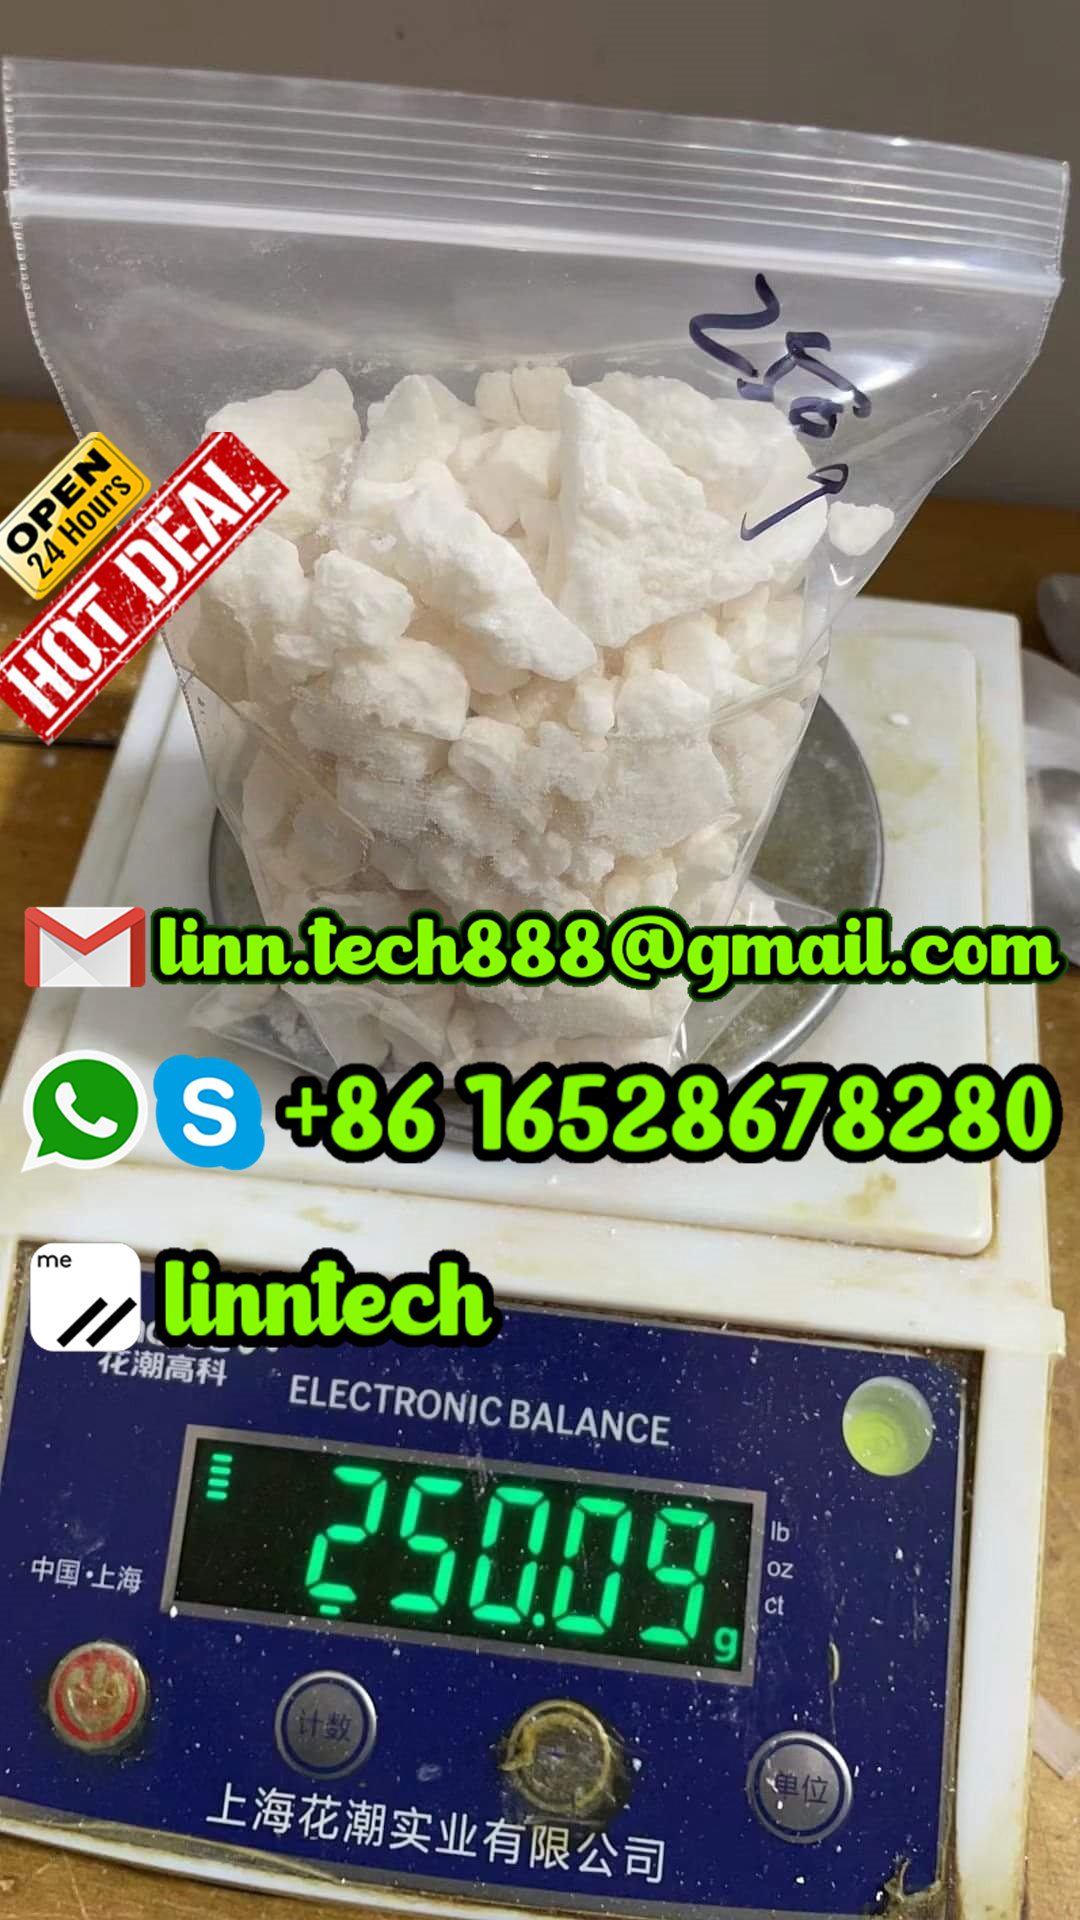 Buy crystal white yellow Eutyones-d5 DMT Molly mdma dmt crystal  Euk cas 478020-50-7 strong  - photo